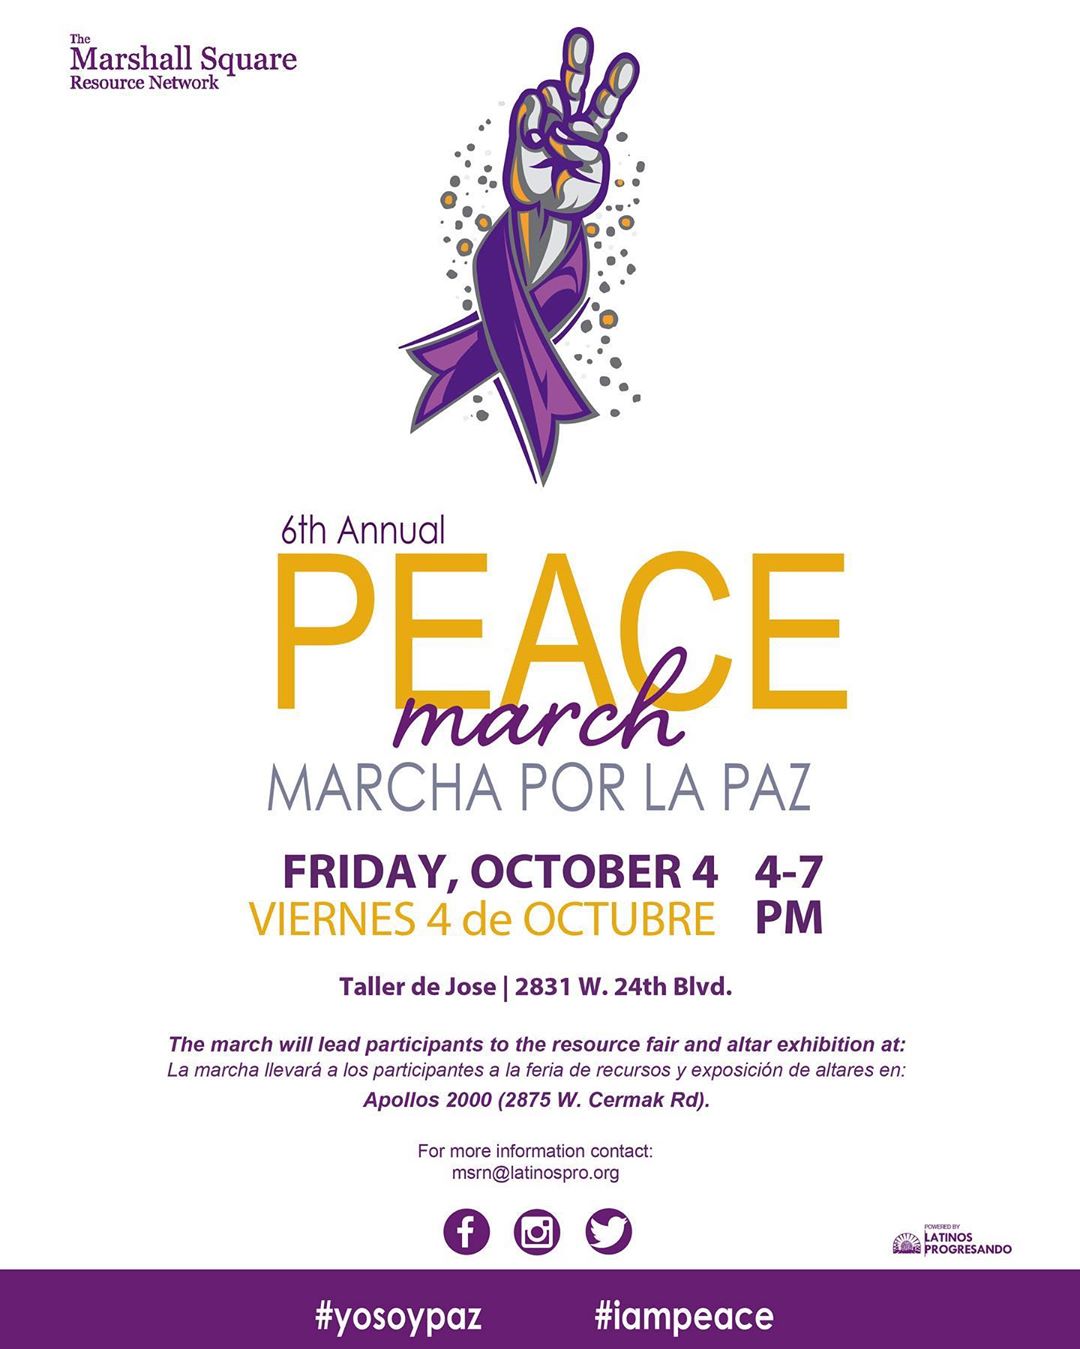 Join the Marshall Square Resource Network to walk for Peace, remember and honor victims of Domestic Violence and to take a stand against domestic violence and all forms of violence which afflict our homes and neighborhoods at the annual Peace March this Friday!